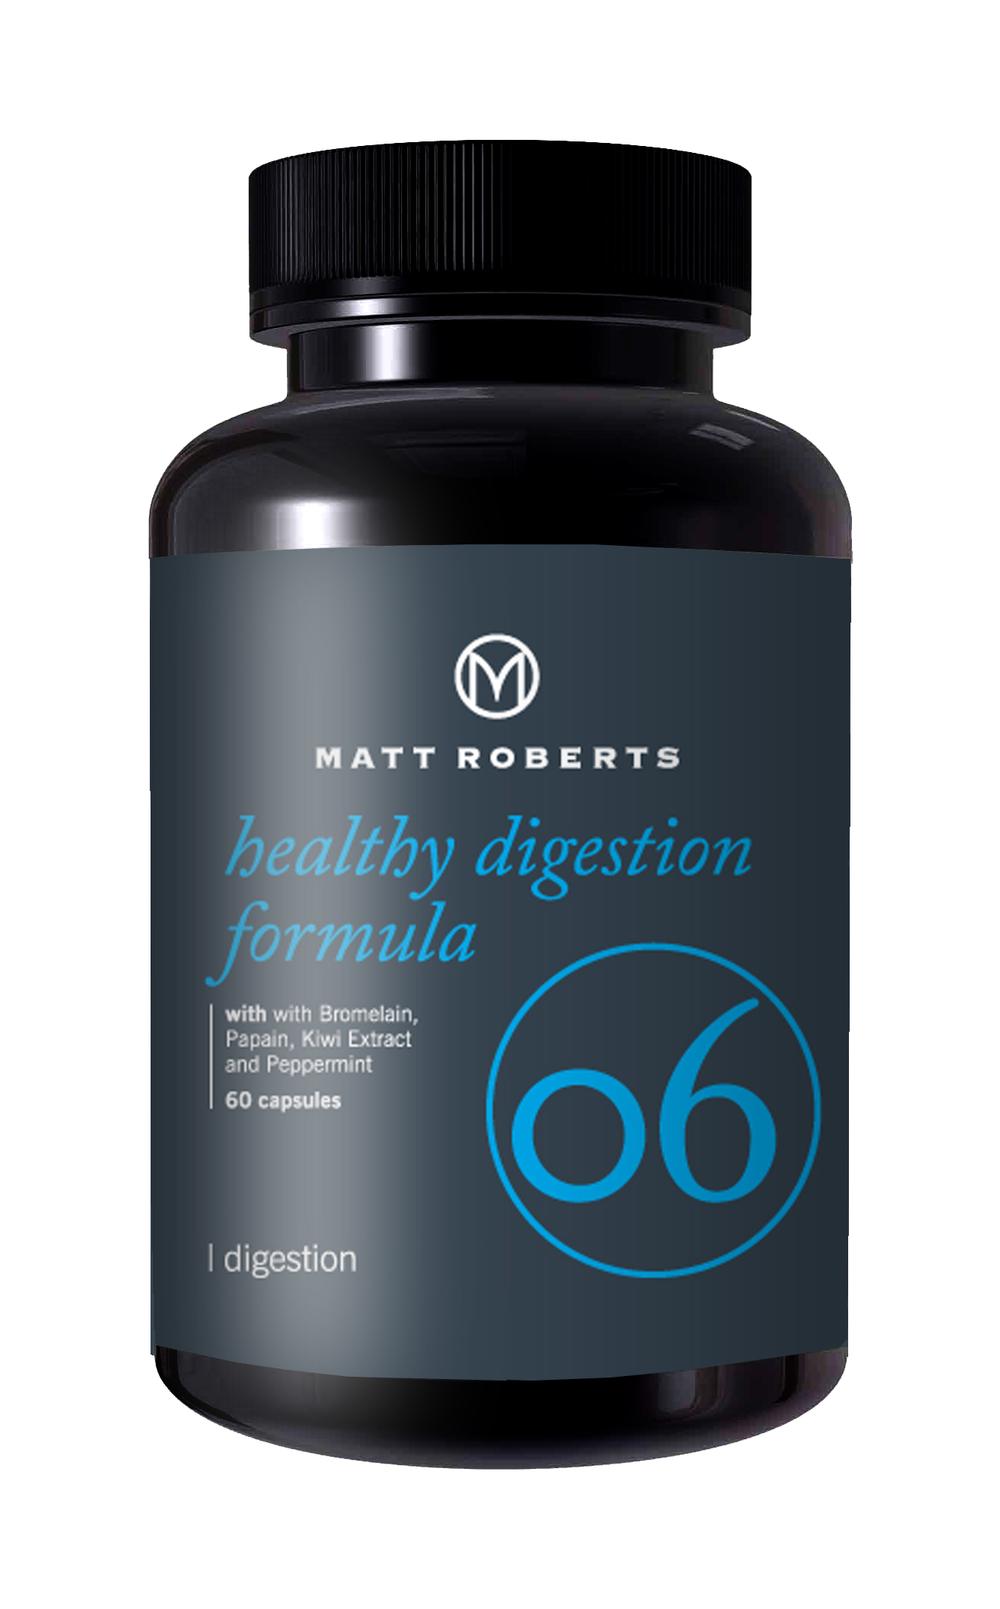 Roberts has had success with brand extensions such as supplements